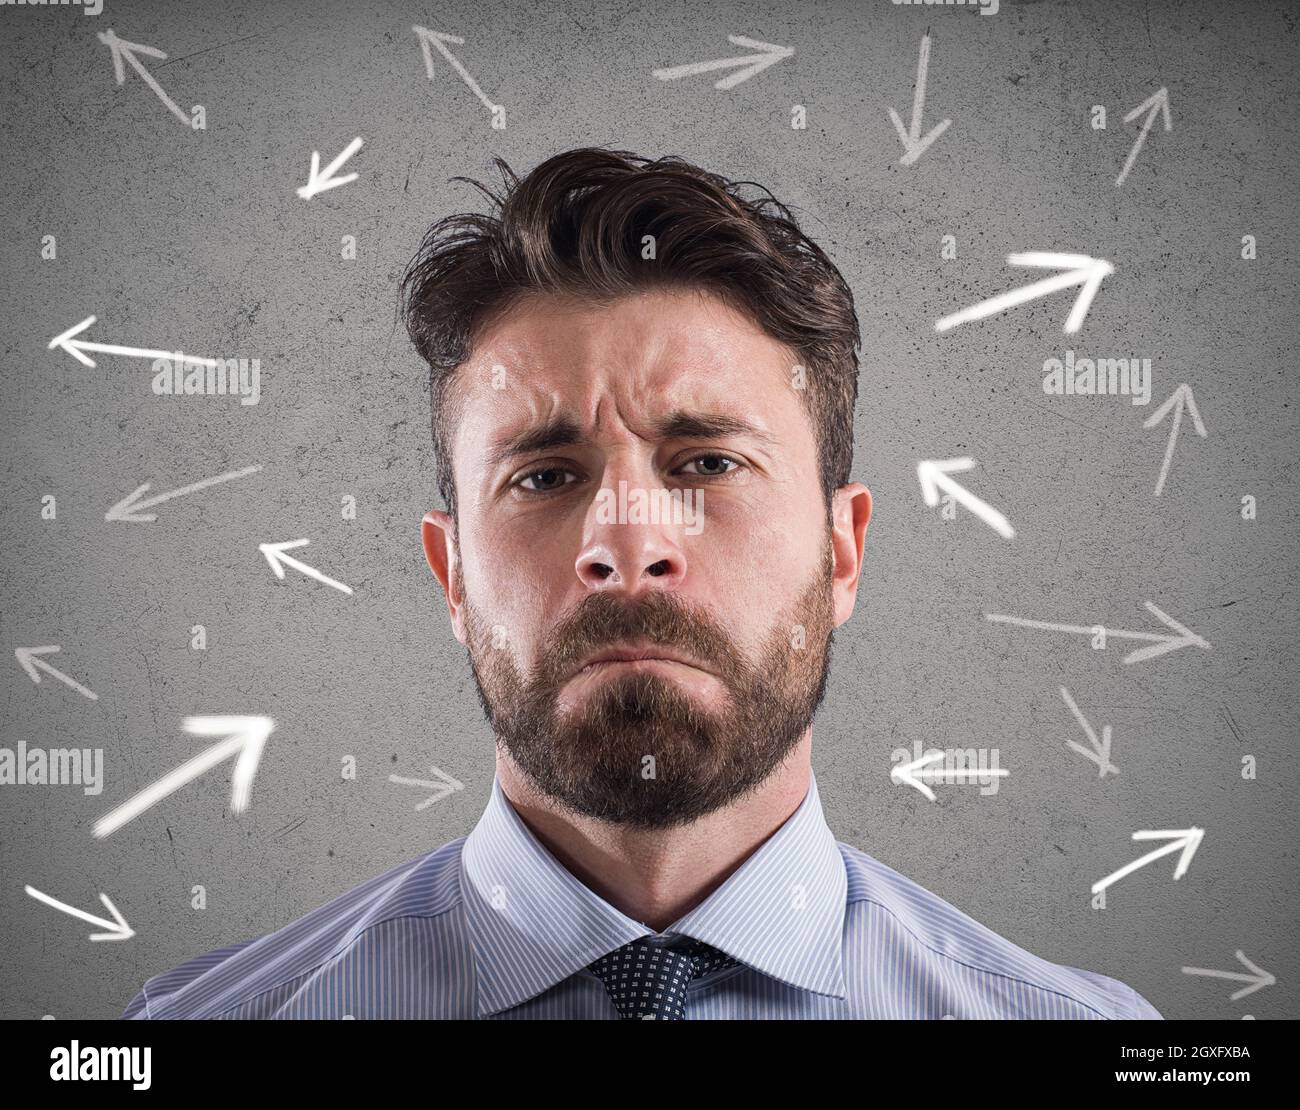 Confused businessman looking a wall with directional arrows. concept of confusion Stock Photo